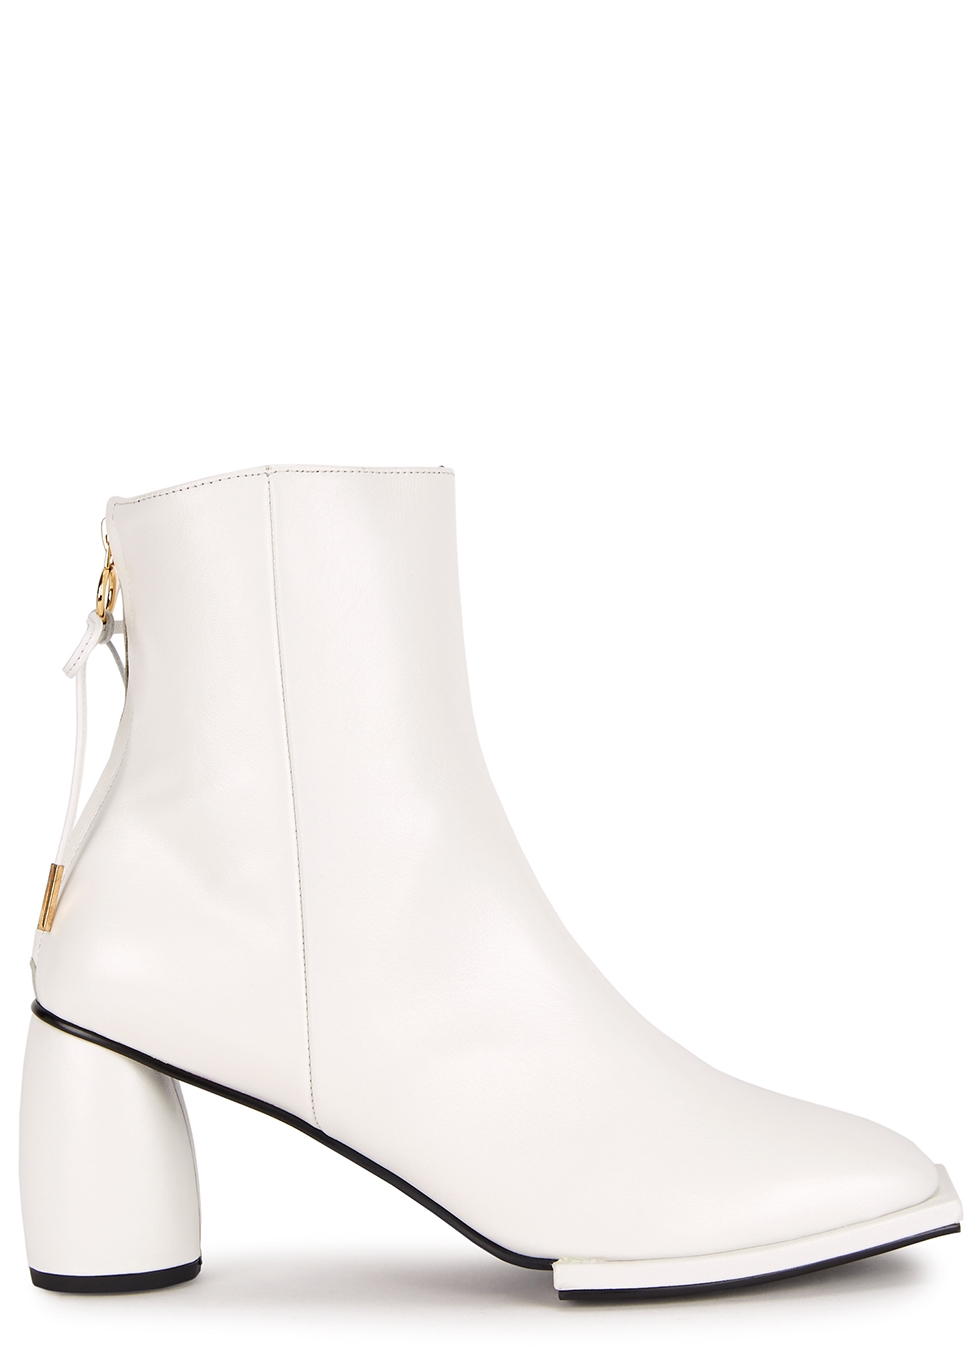 white leather boots